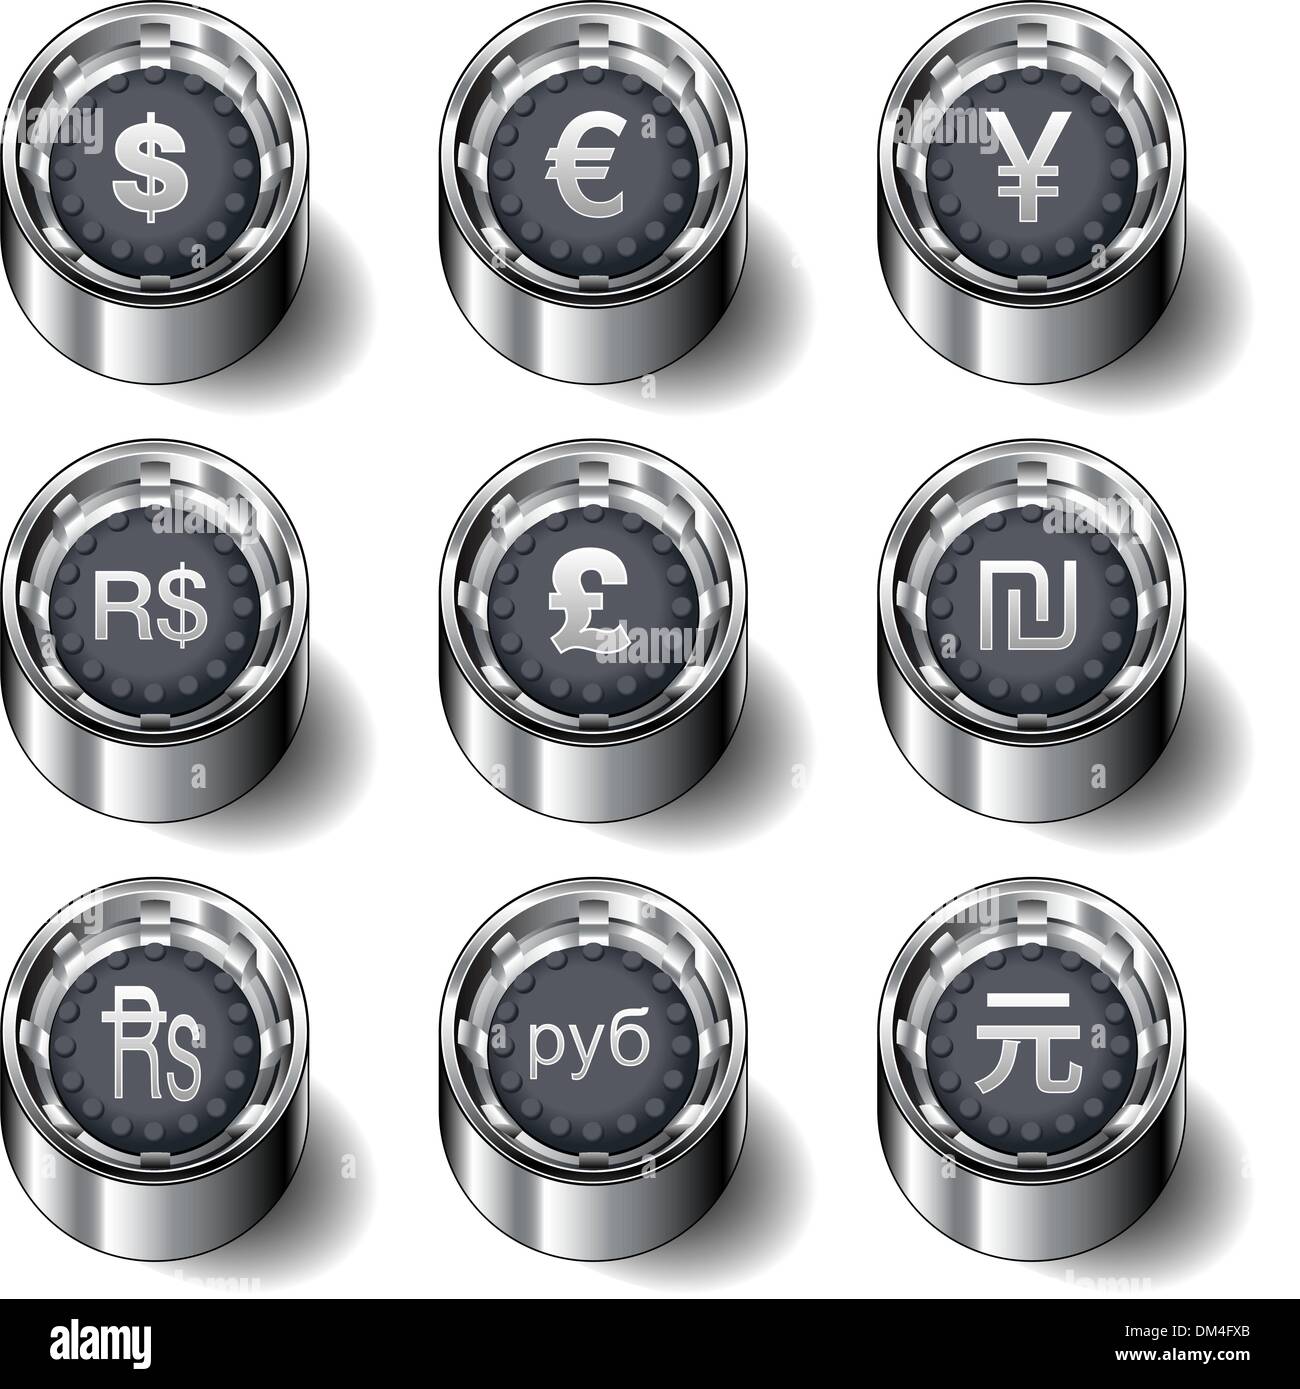 International currency symbol icons on rubber vector buttons Stock Vector